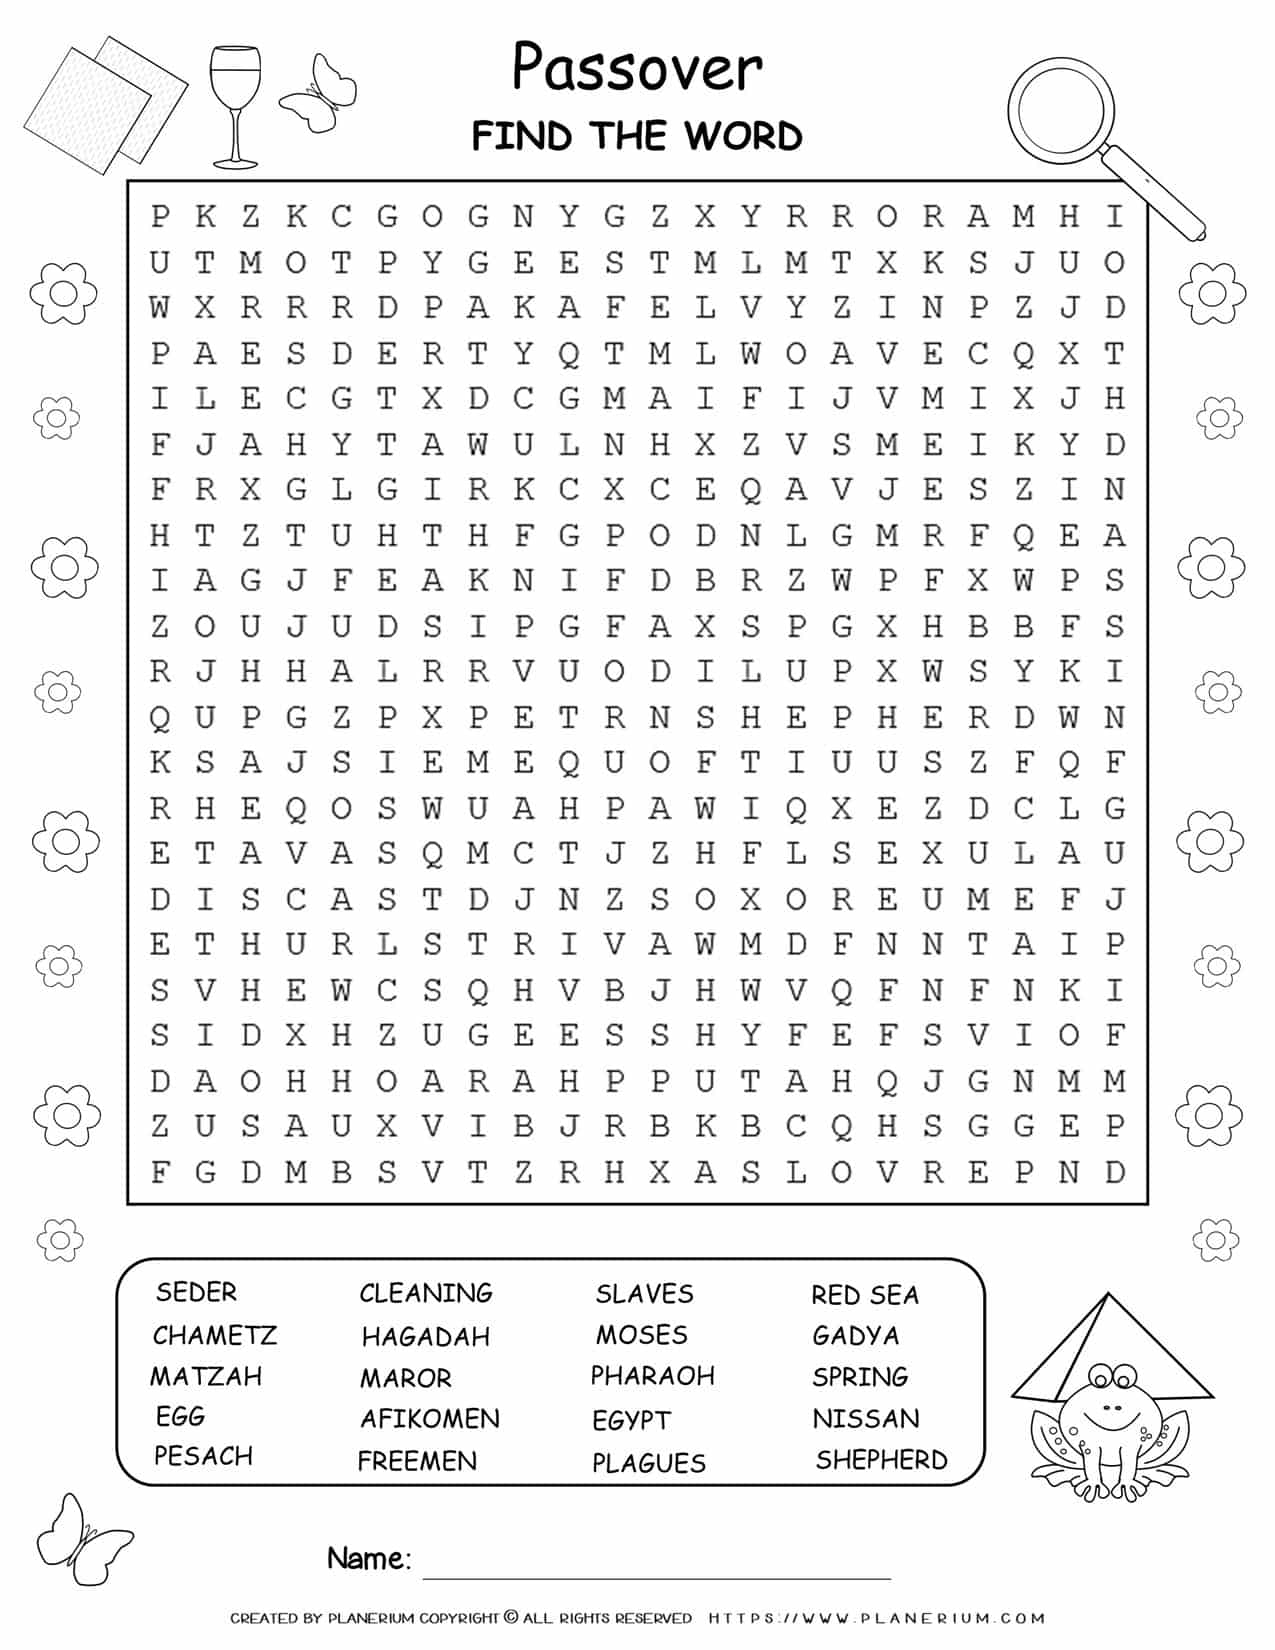 Passover Word Search Puzzle | Planerium